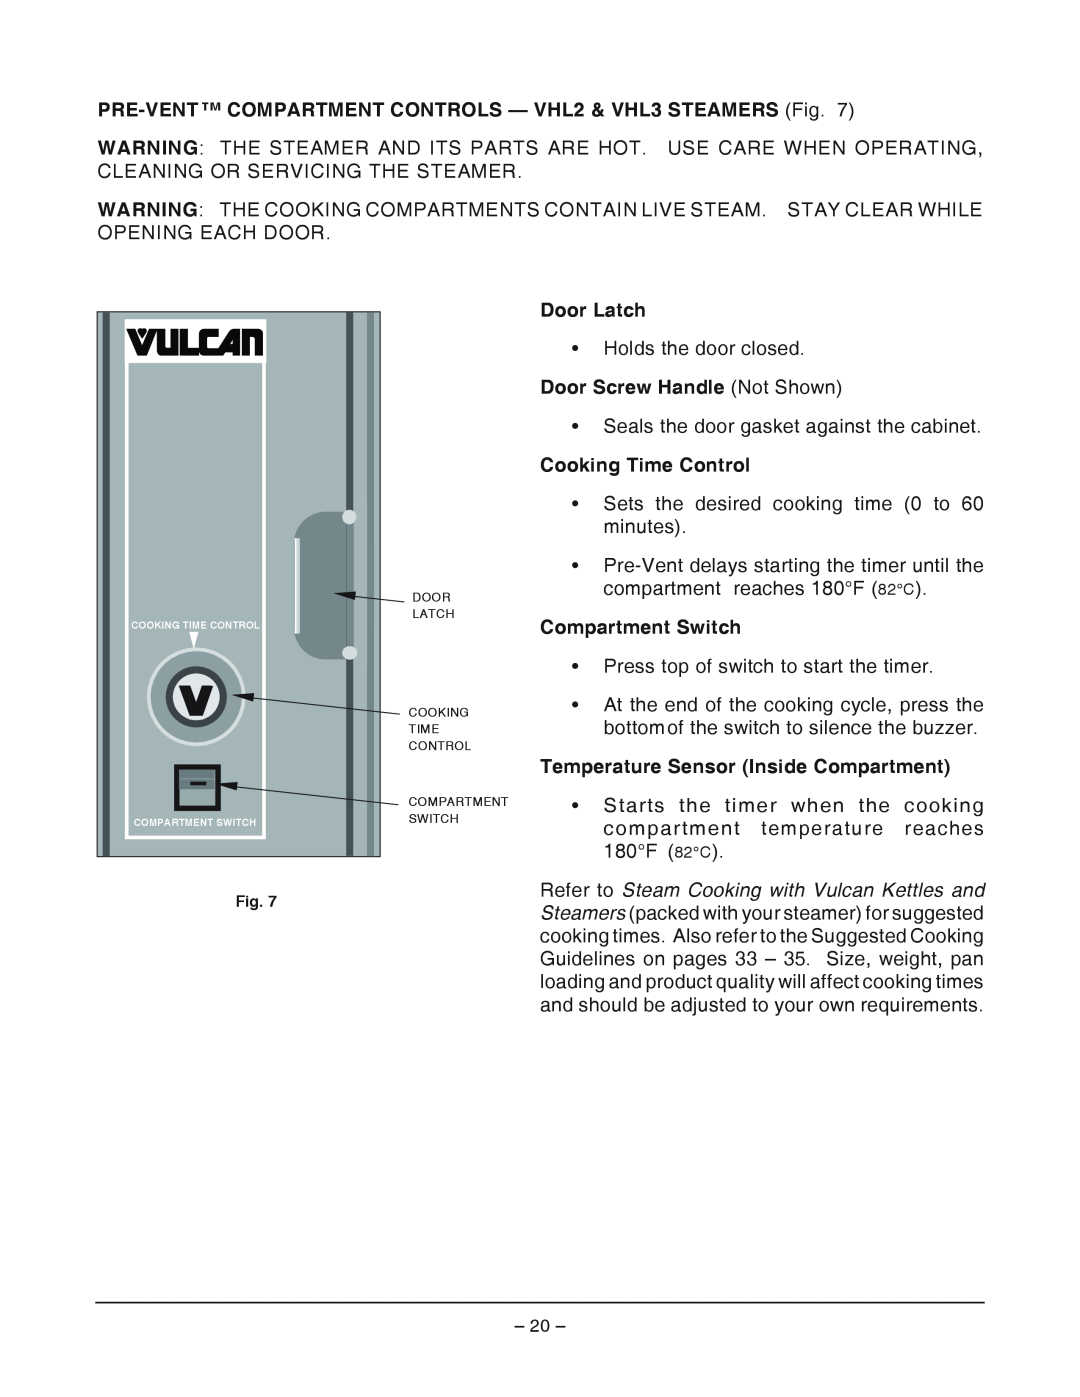 Vulcan-Hart VHL2G operation manual Door Latch, Door Screw Handle Not Shown, Cooking Time Control, Compartment Switch 